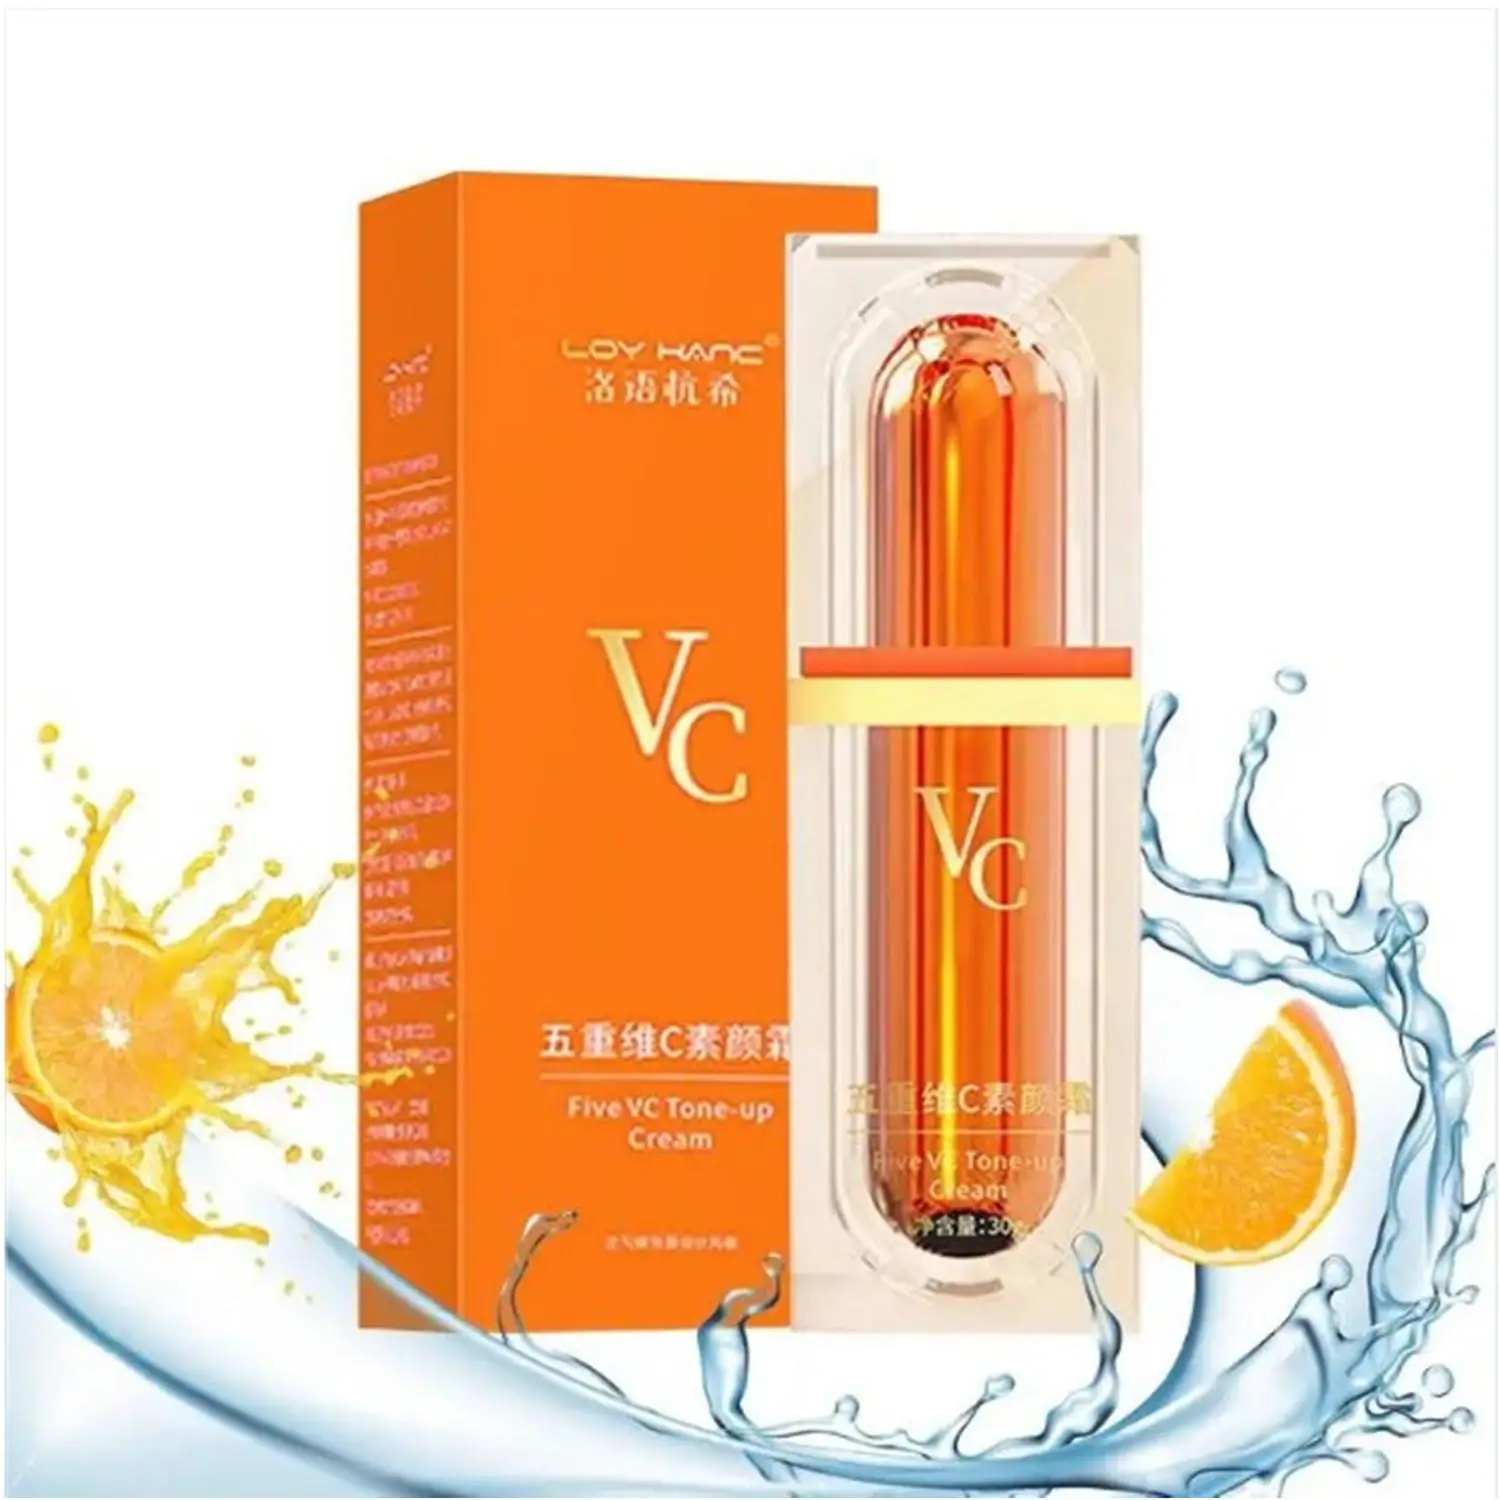 

Five Vitamin C Tone-up Cream 30g VC Whitening Brightening Concealer Natural Moisturizing Lazy Makeup Cream Cosmetic Dropshipping